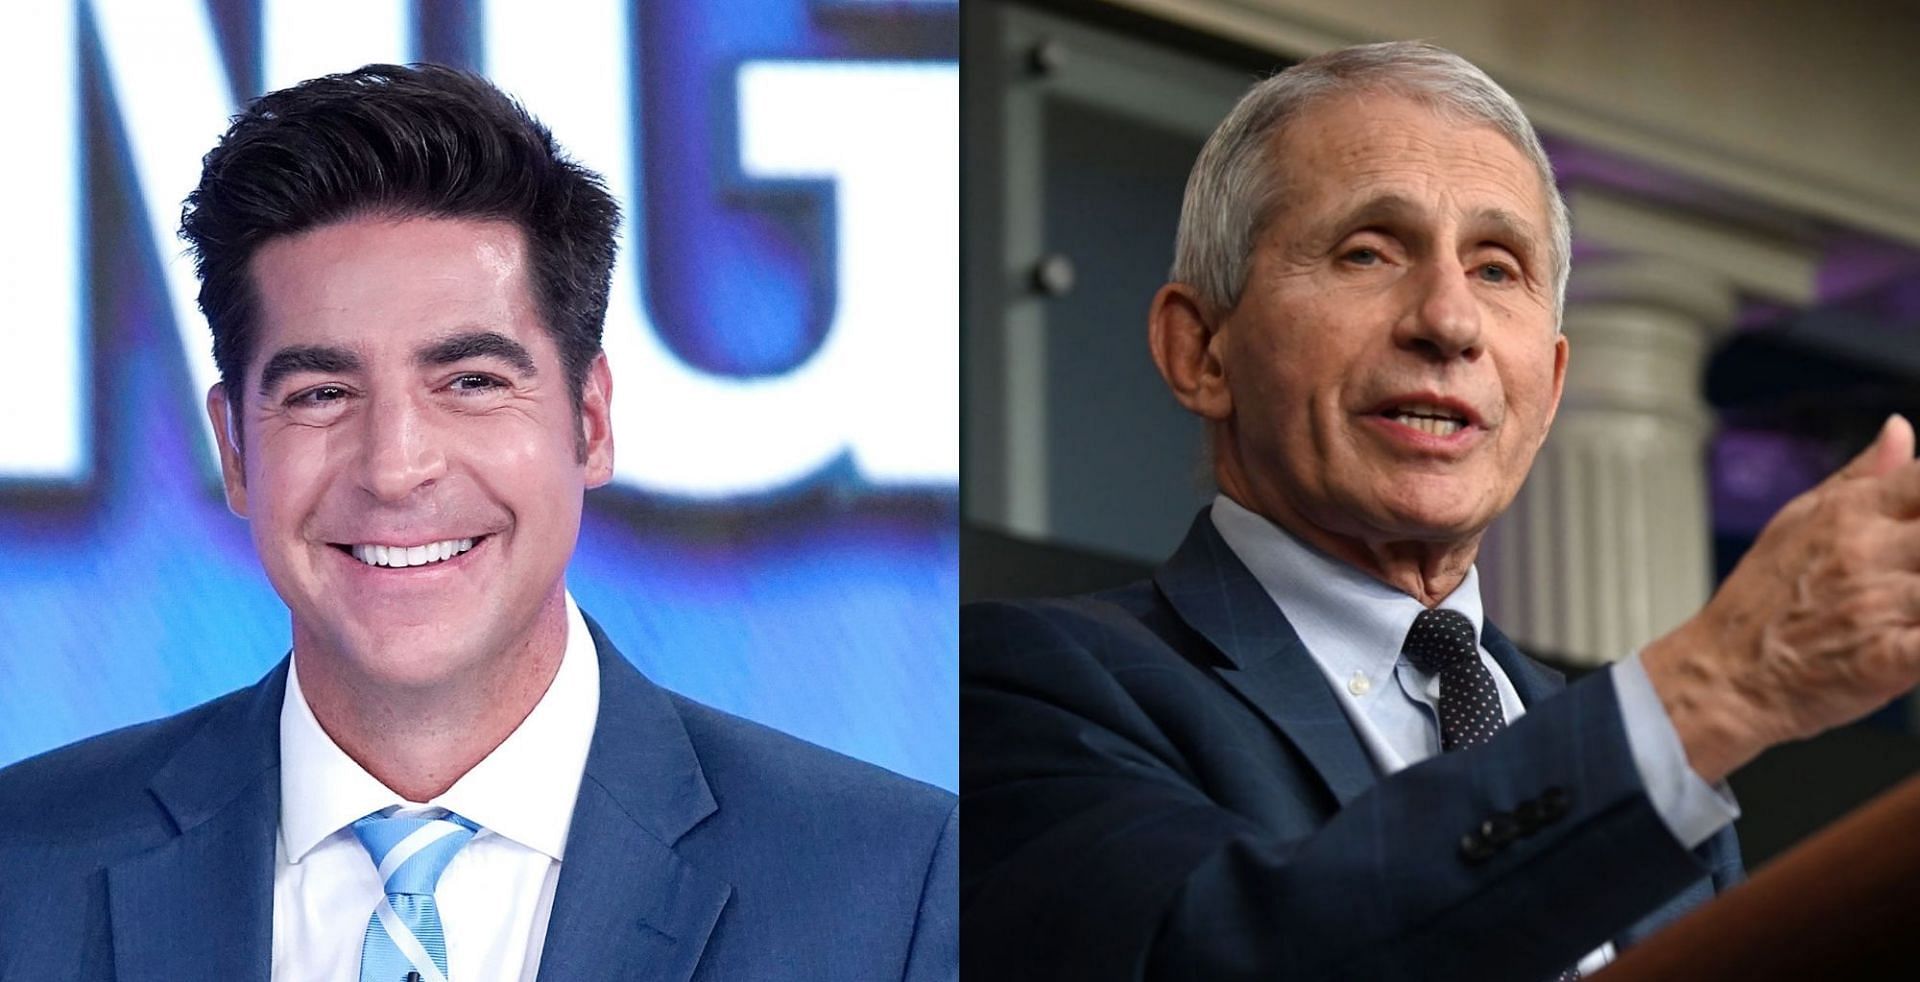 Jesse Watters landed in hot waters for &quot;kill shot&quot; comments against Dr. Fauci (Image via John Lamparski/Getty Images and Chen Mengtong/Getty Images)